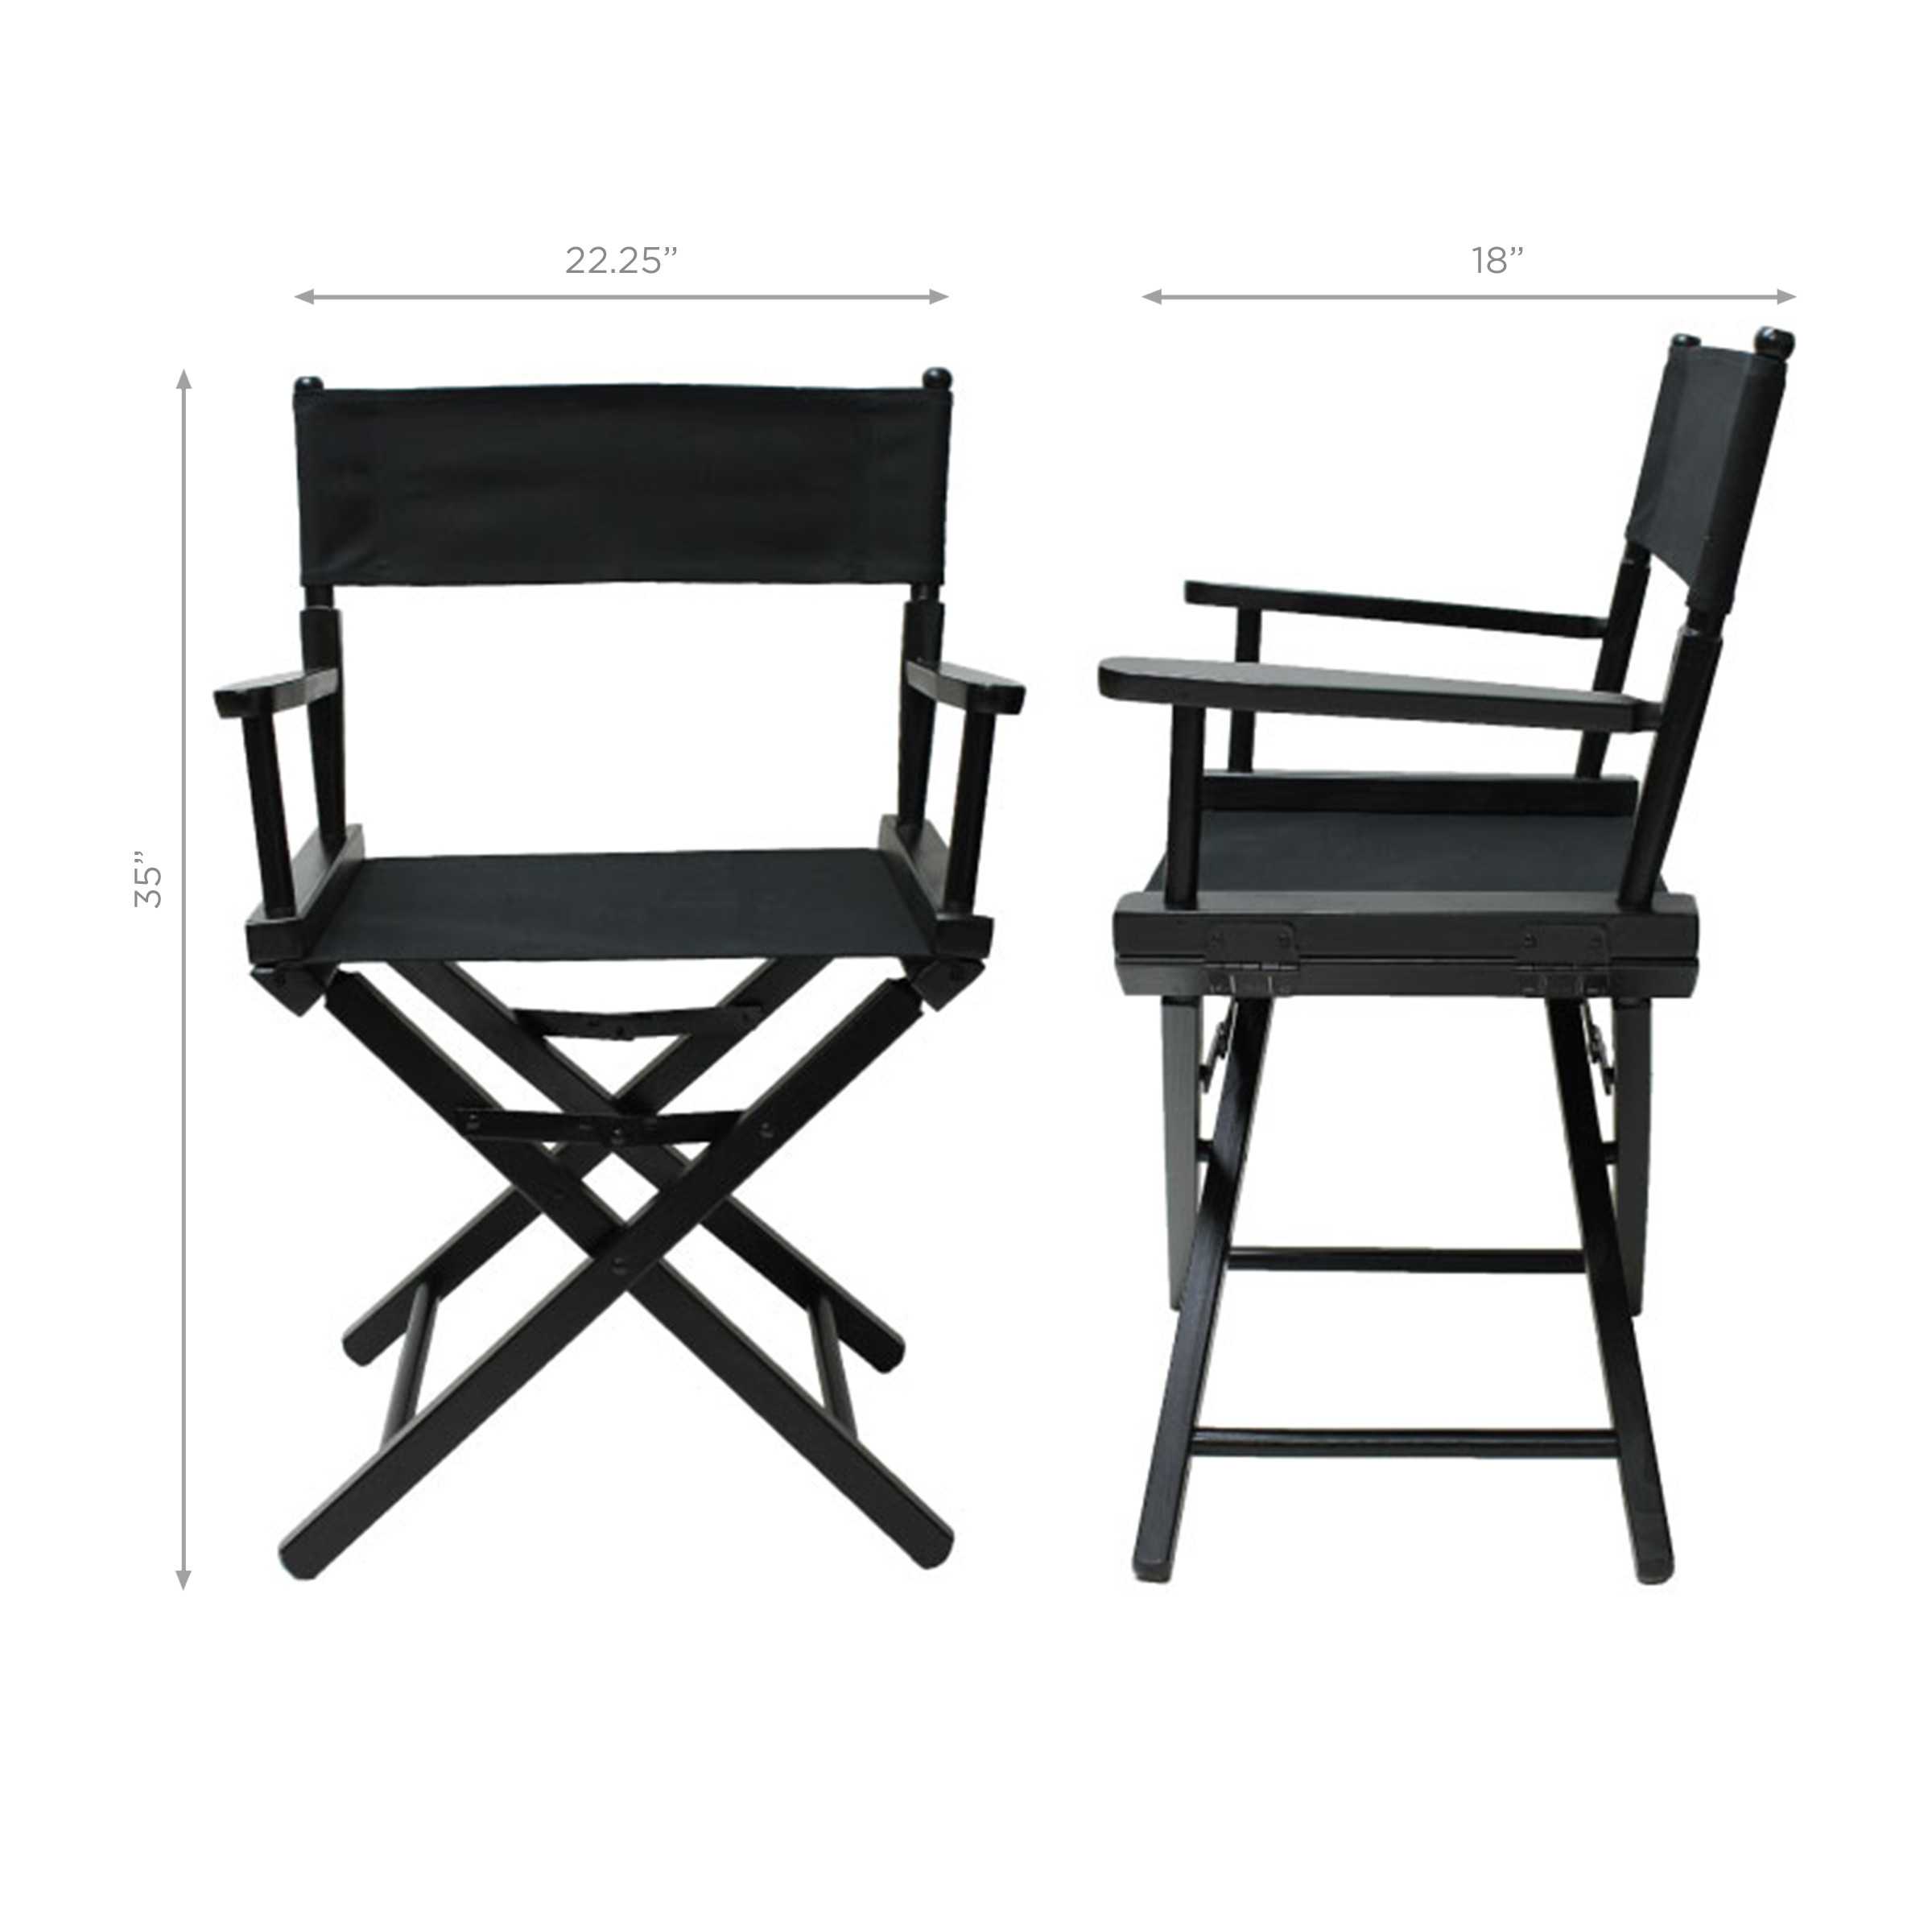 CORONA EXTRA TABLE HEIGHT DIRECTORS CHAIR